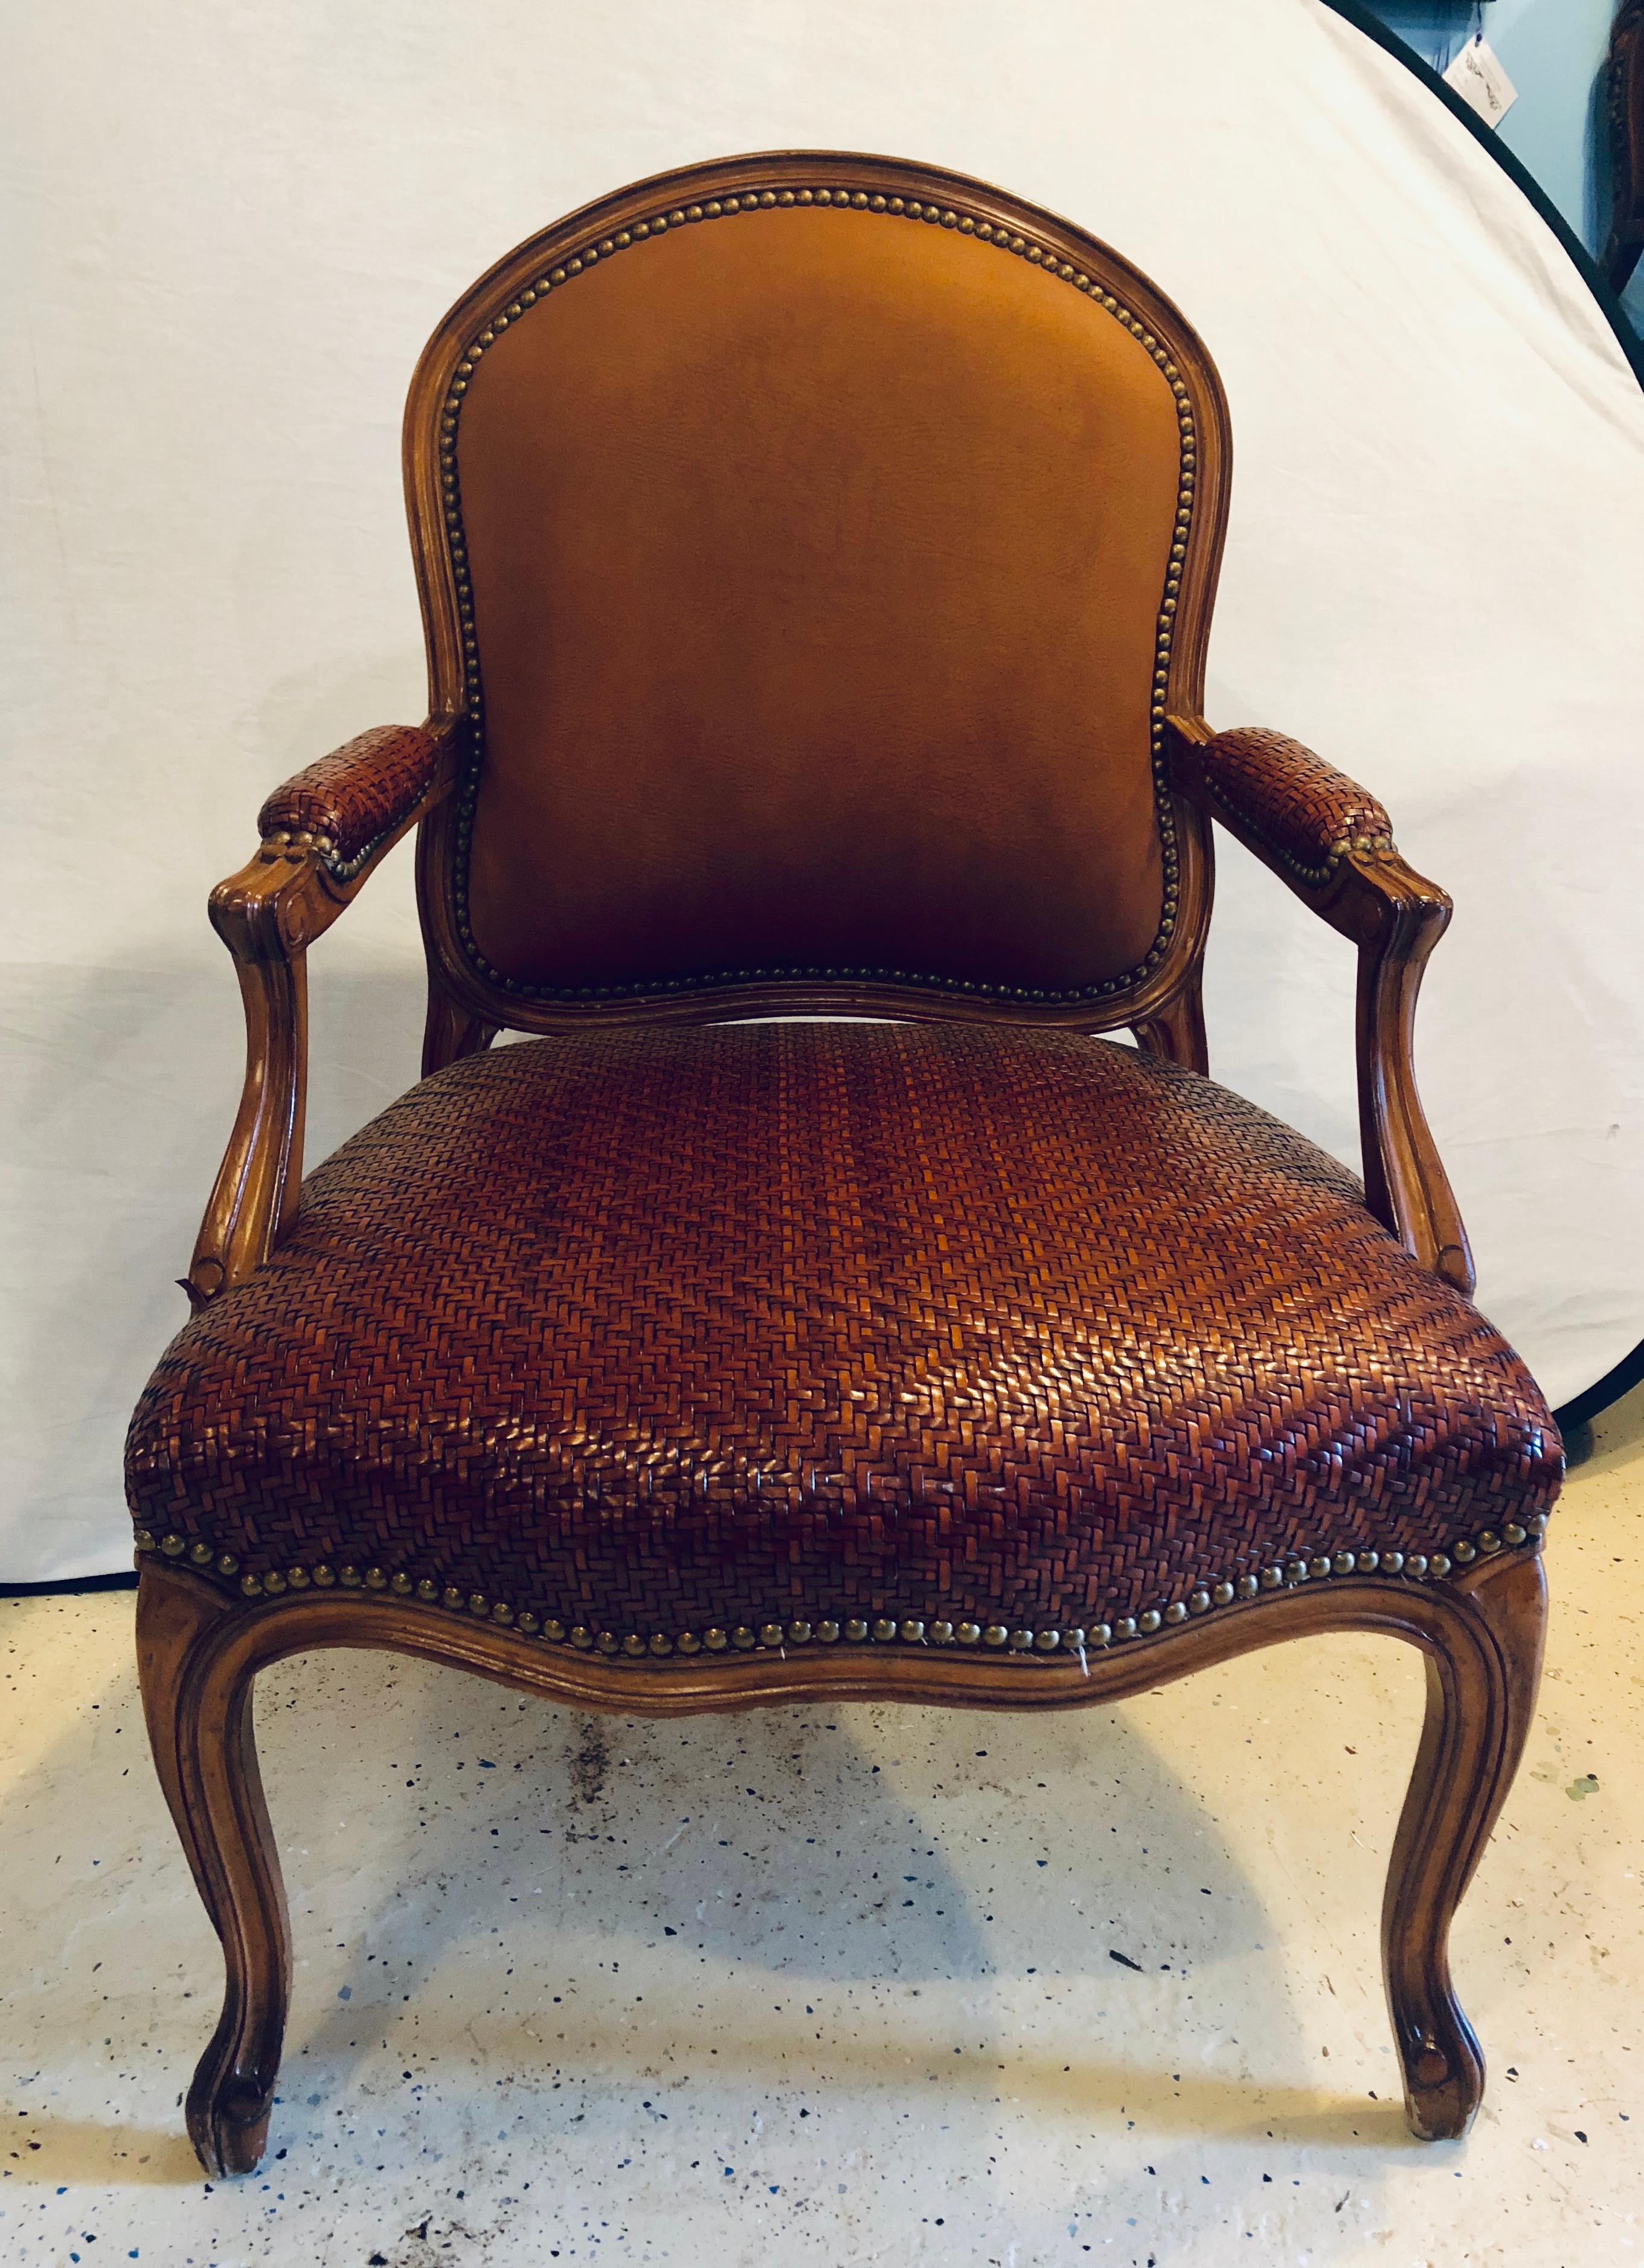 Brown suede and tweed leather bergère armchair by Brunschwig & Fils. This rarely ever sat in bergère armchair by Brunschwig and Fils is simply stunning and certain to make any room in the home or office stand out. The suede back compliments the